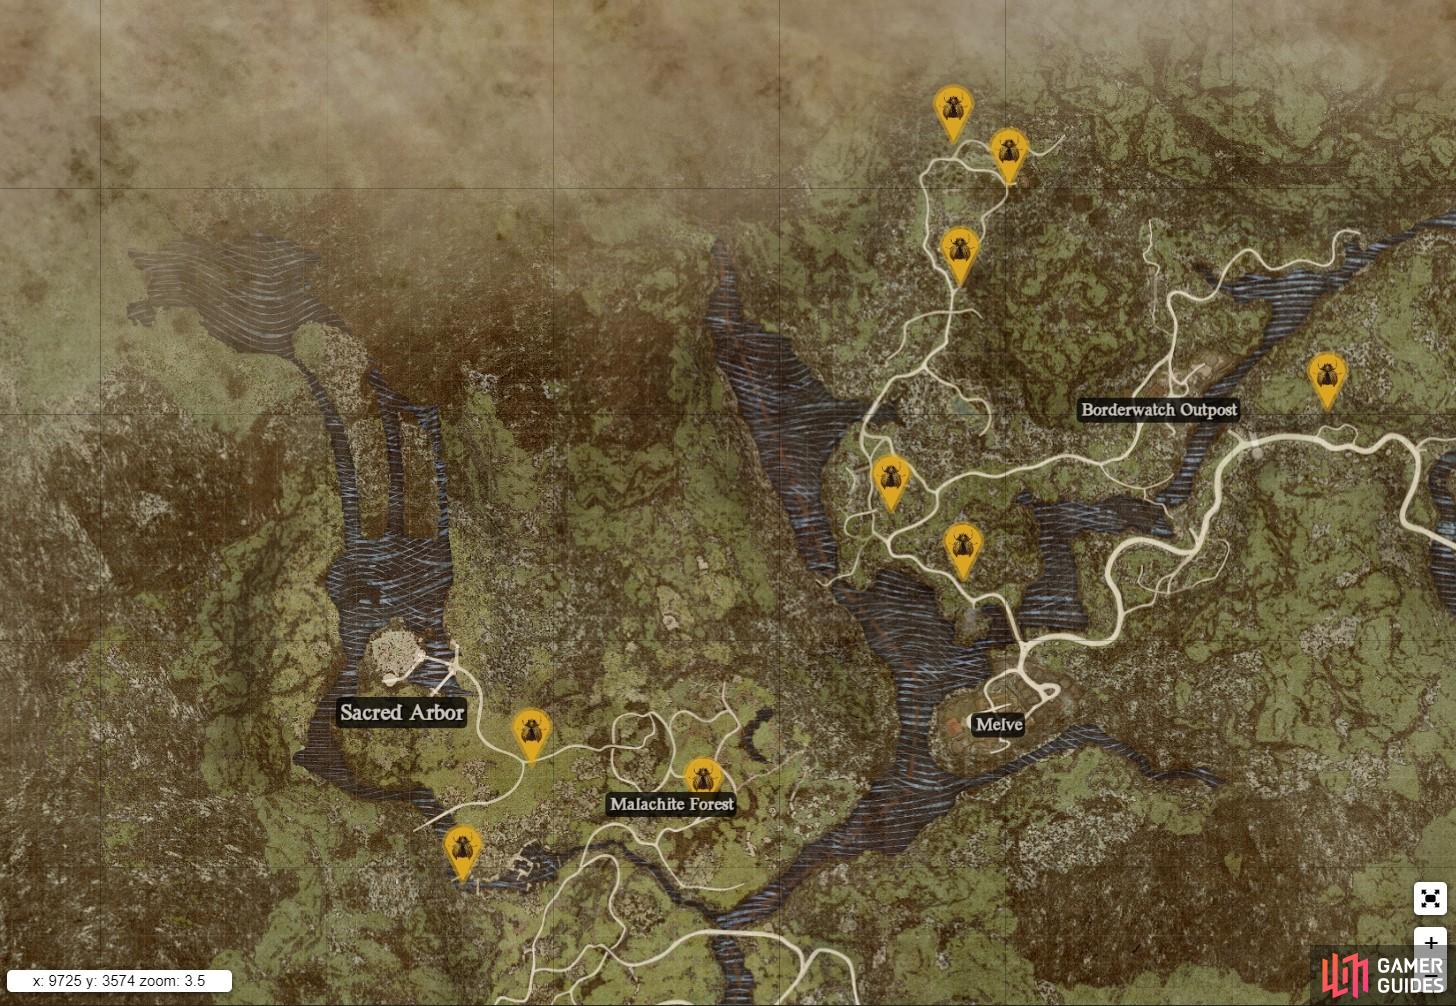 Here’s an example of what you can expect from using our Interactive Map to find Golden Trove Beetles in Dragon’s Dogma 2, among other items, collectibles, and more.